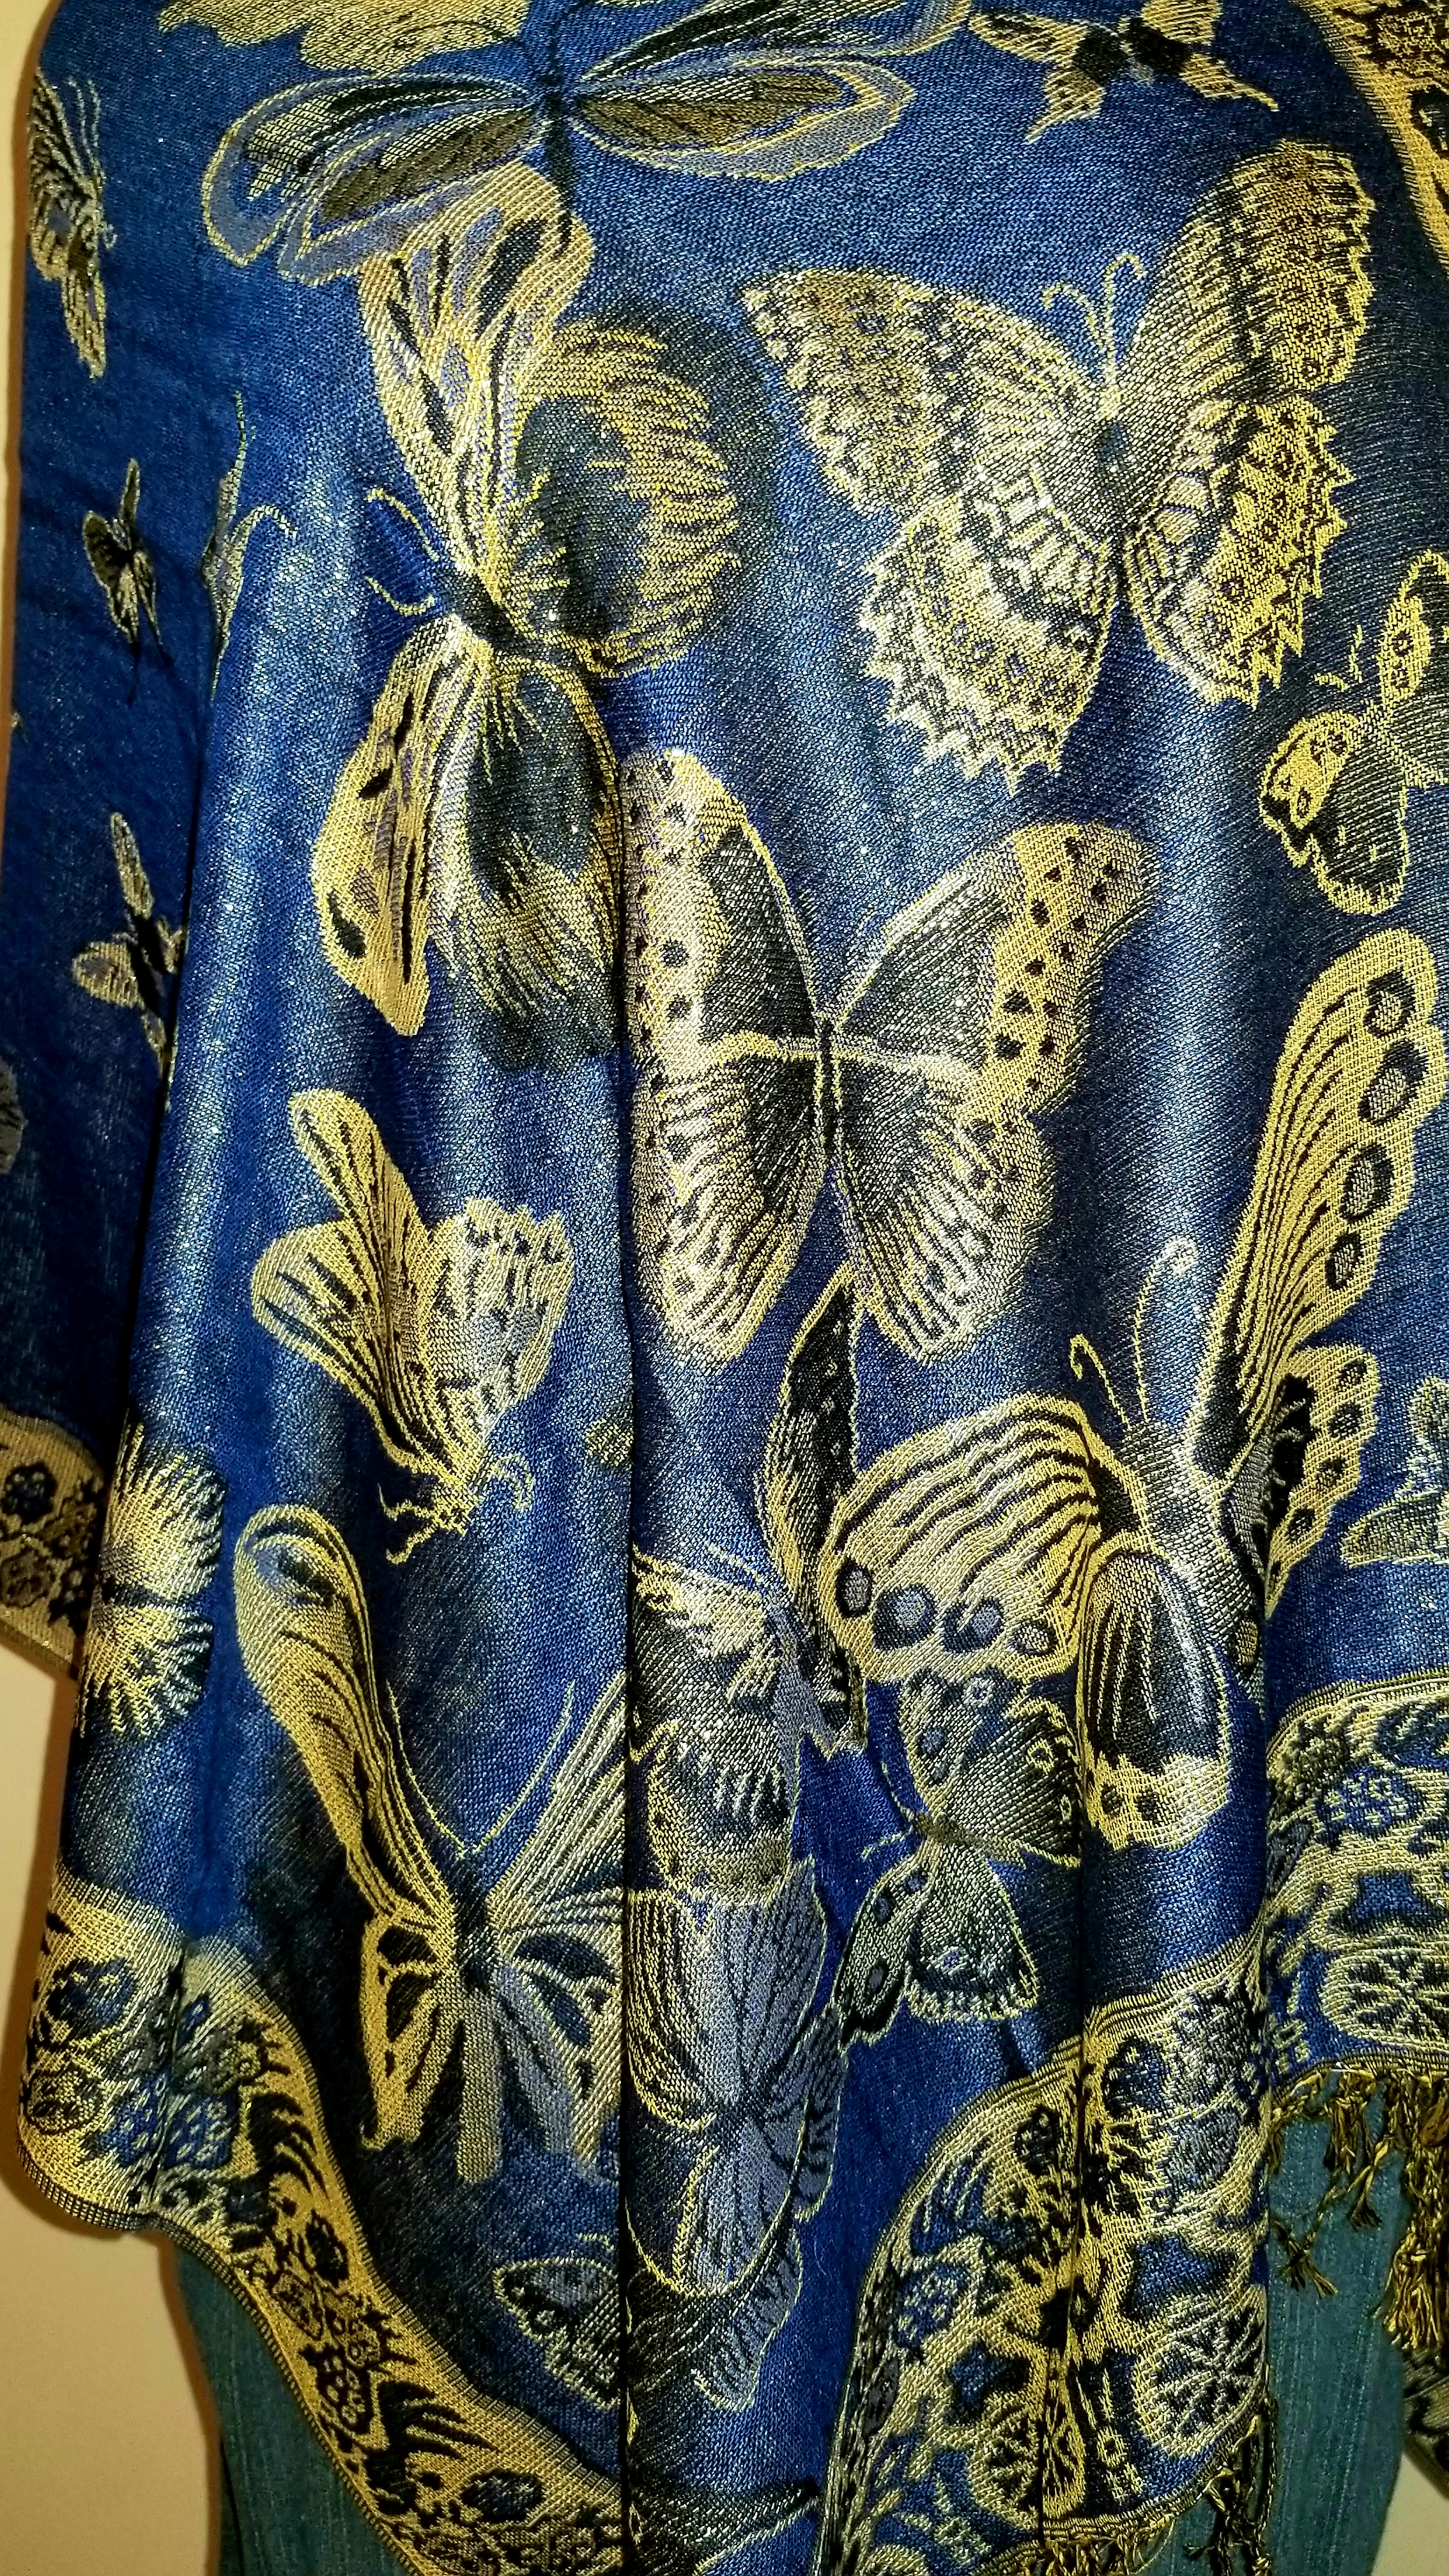 This Butterflies in Royal Blue and Gold Popover Reversible Shawlmina Shawl- Silk Blend - Fits most is made with love by The Creative Soul Sisters! Shop more unique gift ideas today with Spots Initiatives, the best way to support creators.